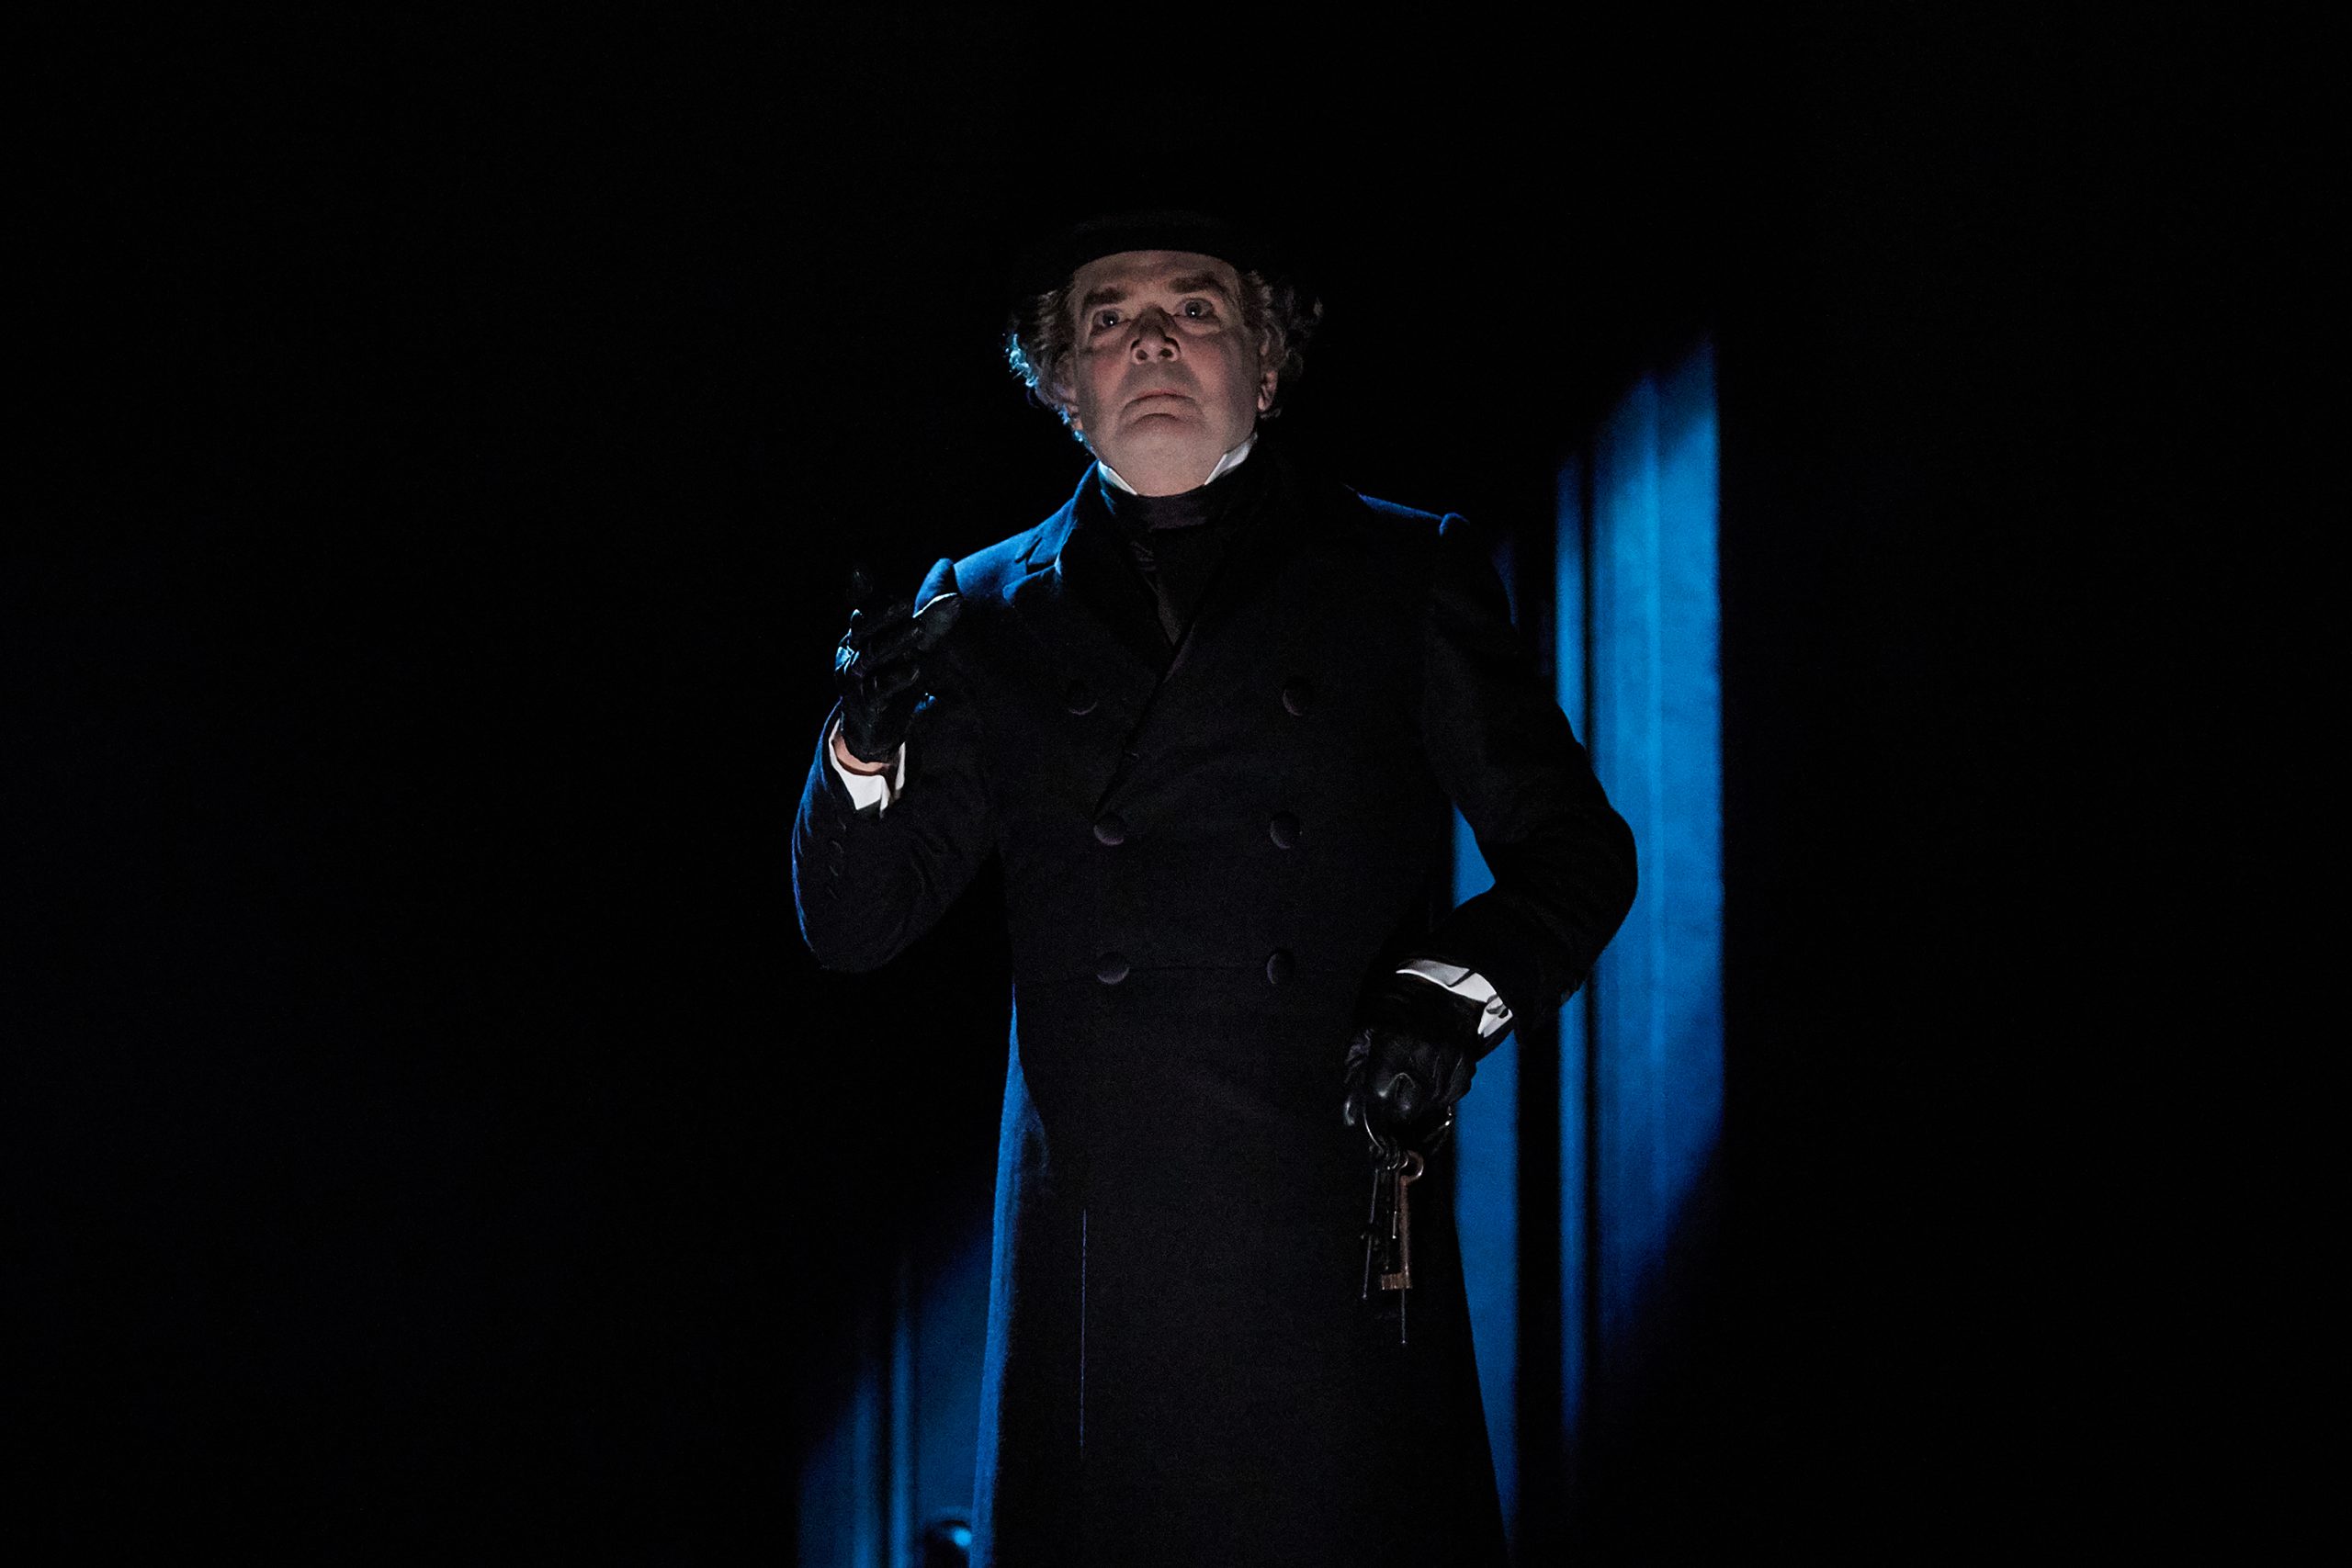 Tony Award winner Jefferson Mays in Charles Dickens’ A CHRISTMAS CAROL, directed by Michael Arden, adapted by Mays, Susan Lyons, and Arden, and conceived by Arden and Tony Award nominee Dane Laffrey, streaming November 28 – January 3; photo by Chris Whitaker.